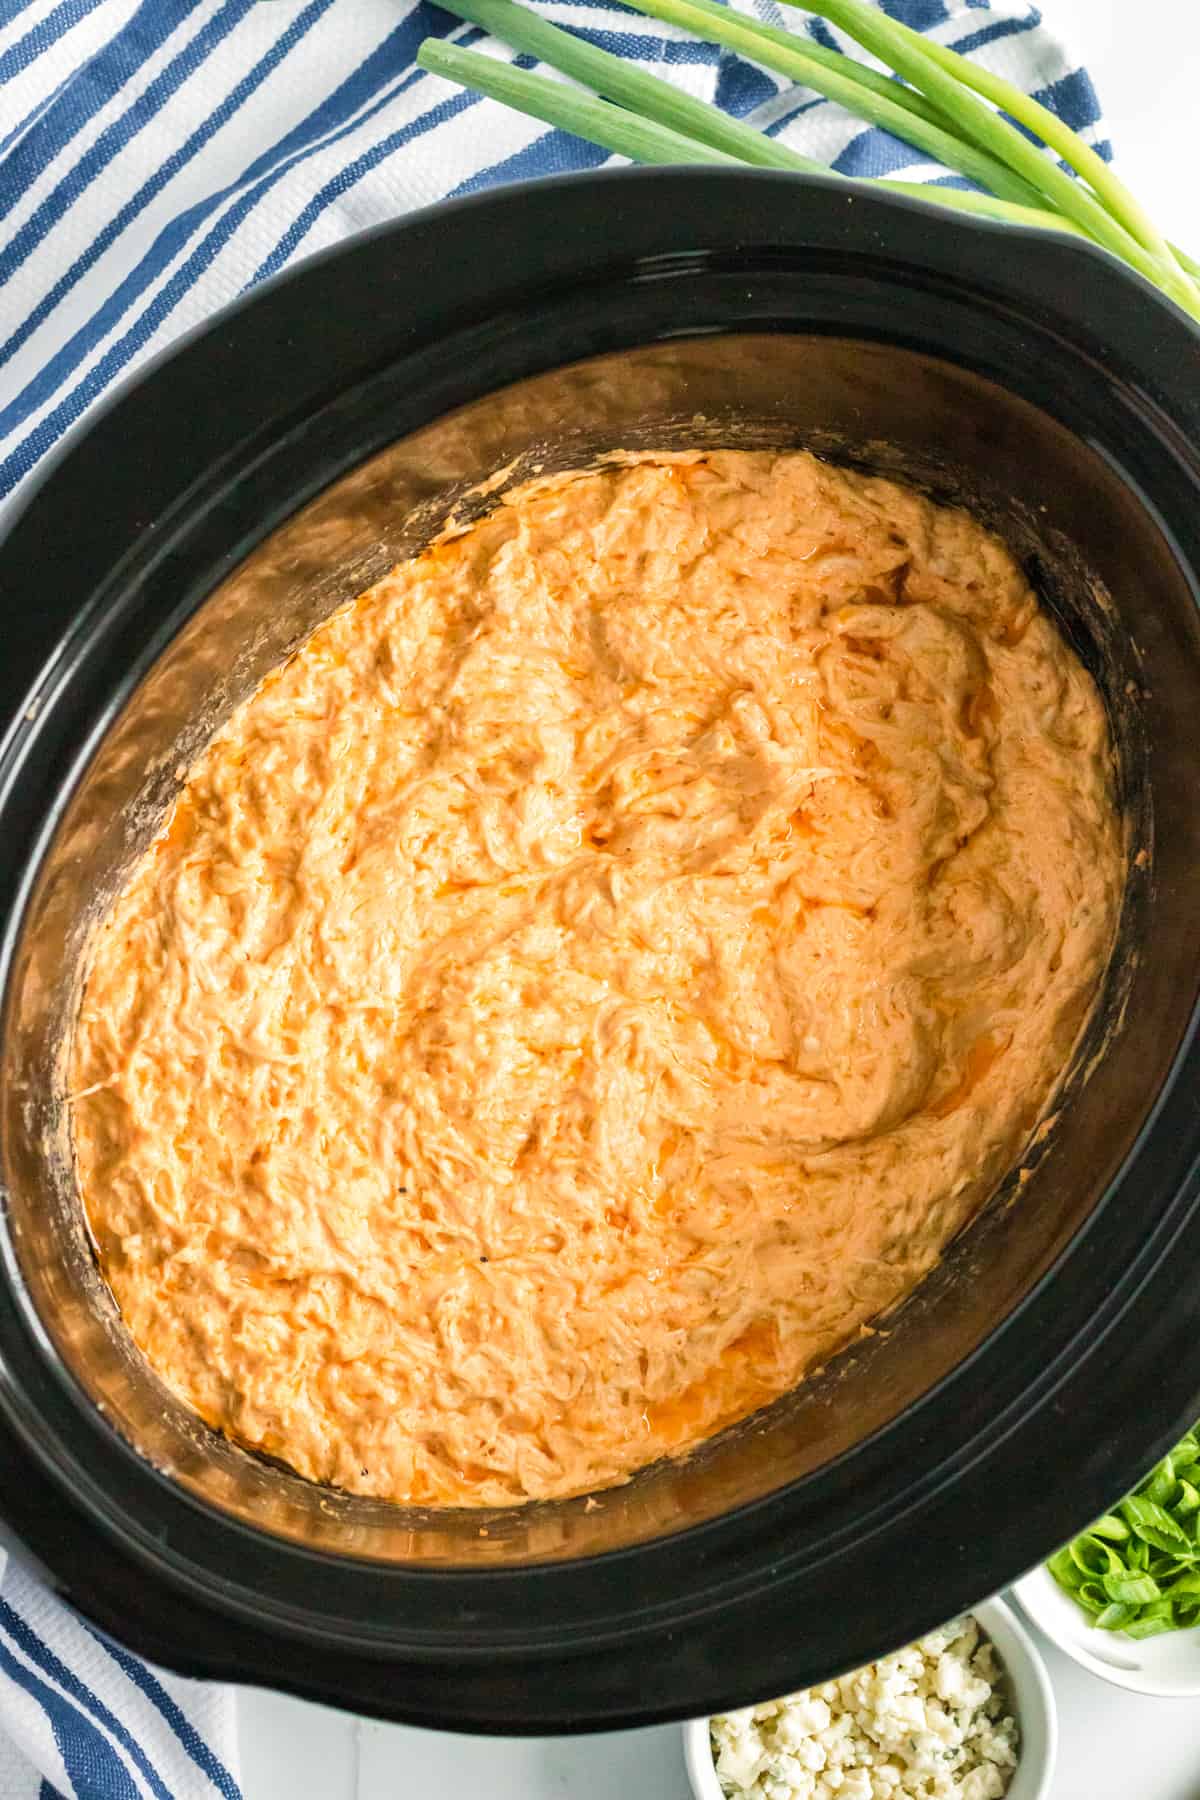 Buffalo chicken dip in the crockpot with green onions and crumbled blue cheese in the background